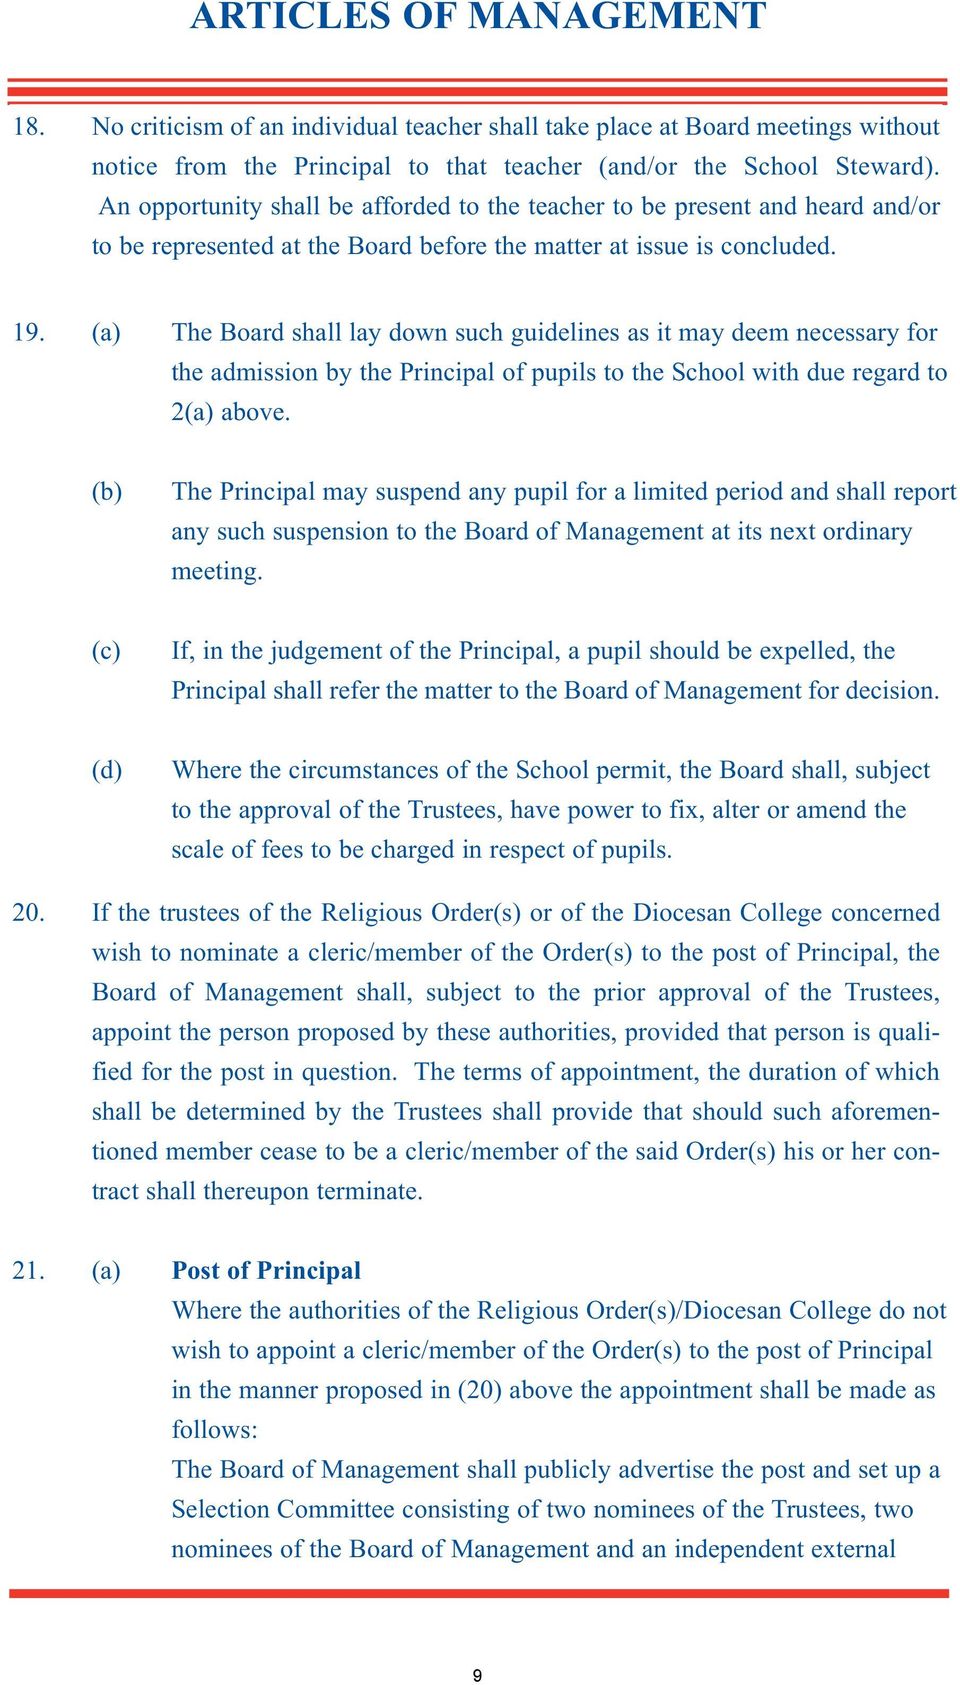 (a) The Board shall lay down such guidelines as it may deem necessary for the admission by the Principal of pupils to the School with due regard to 2(a) above.